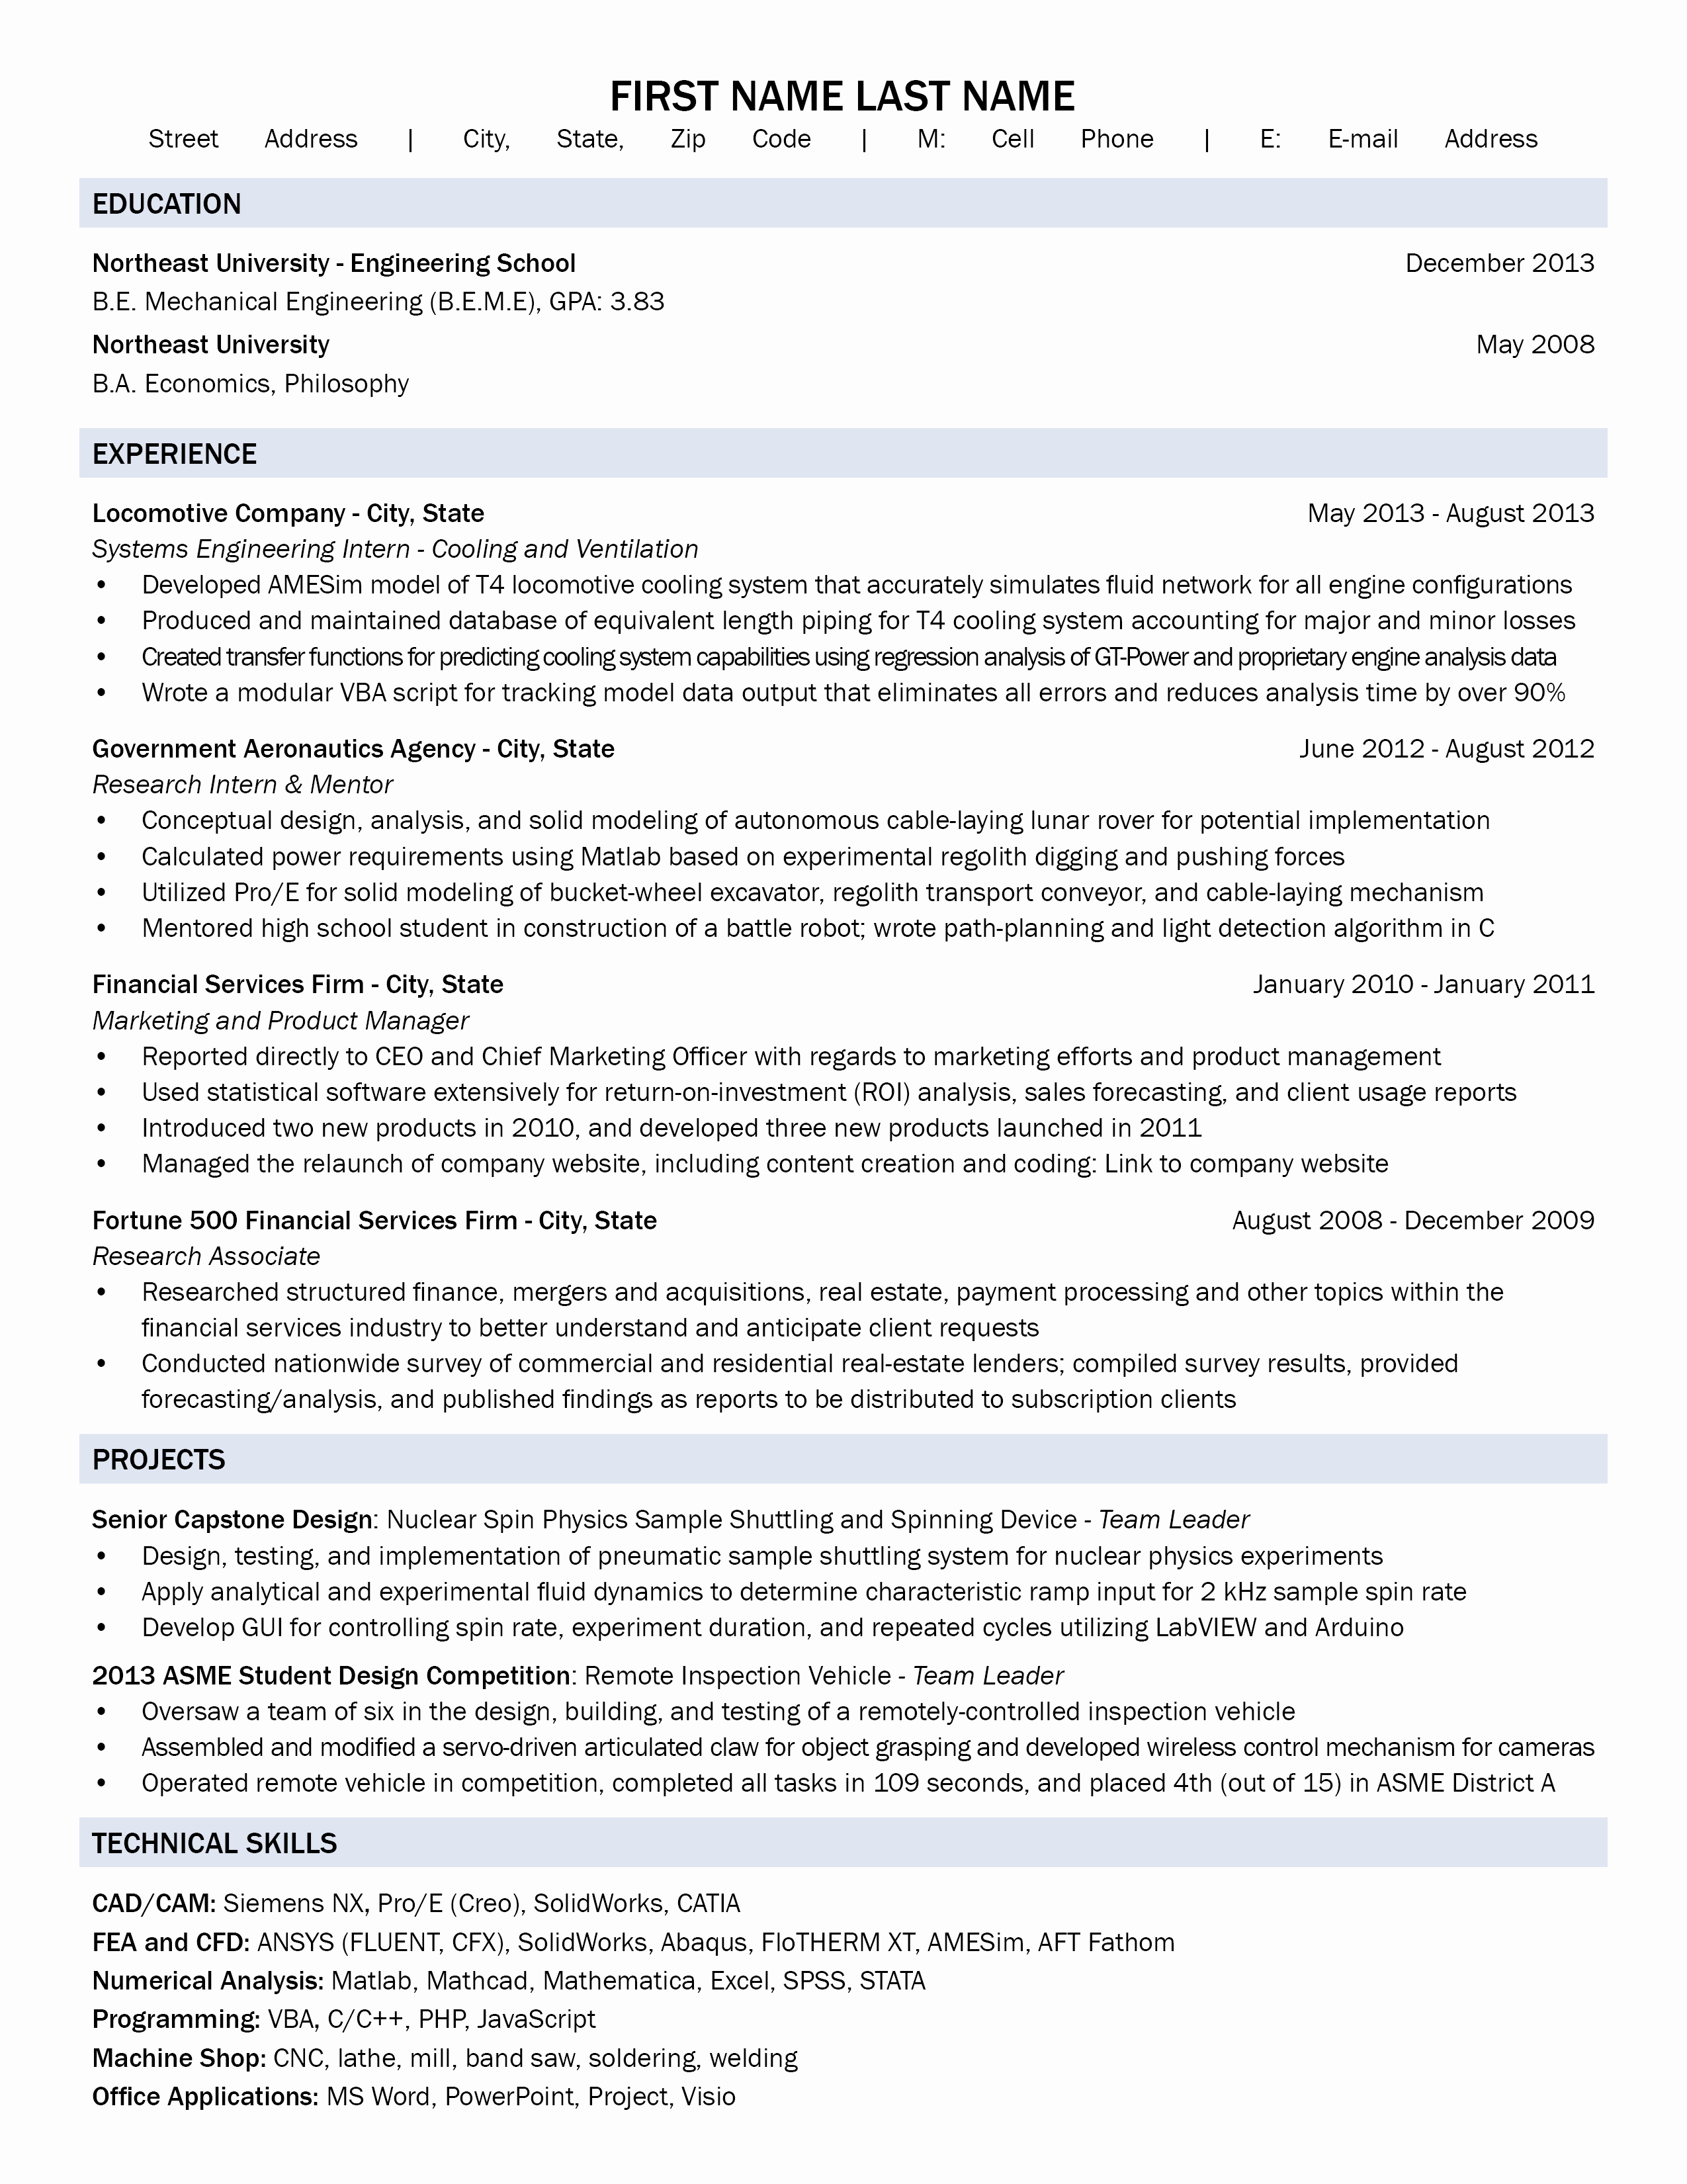 resume templates entry level cover letter medical assistant and